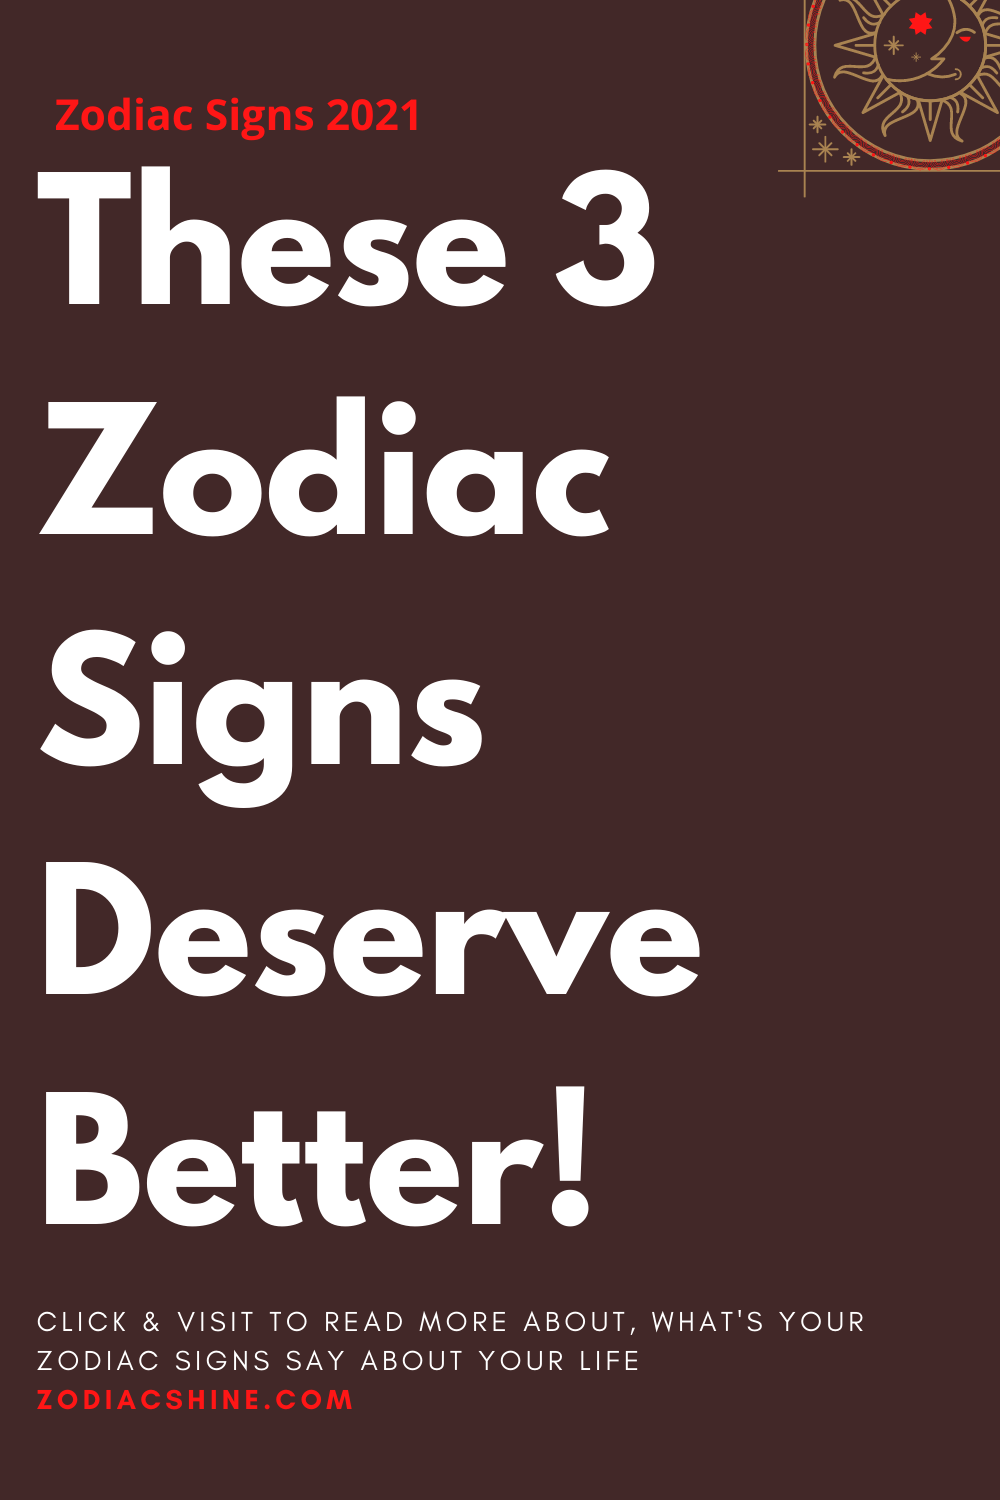 These 3 Zodiac Signs Deserve Better!